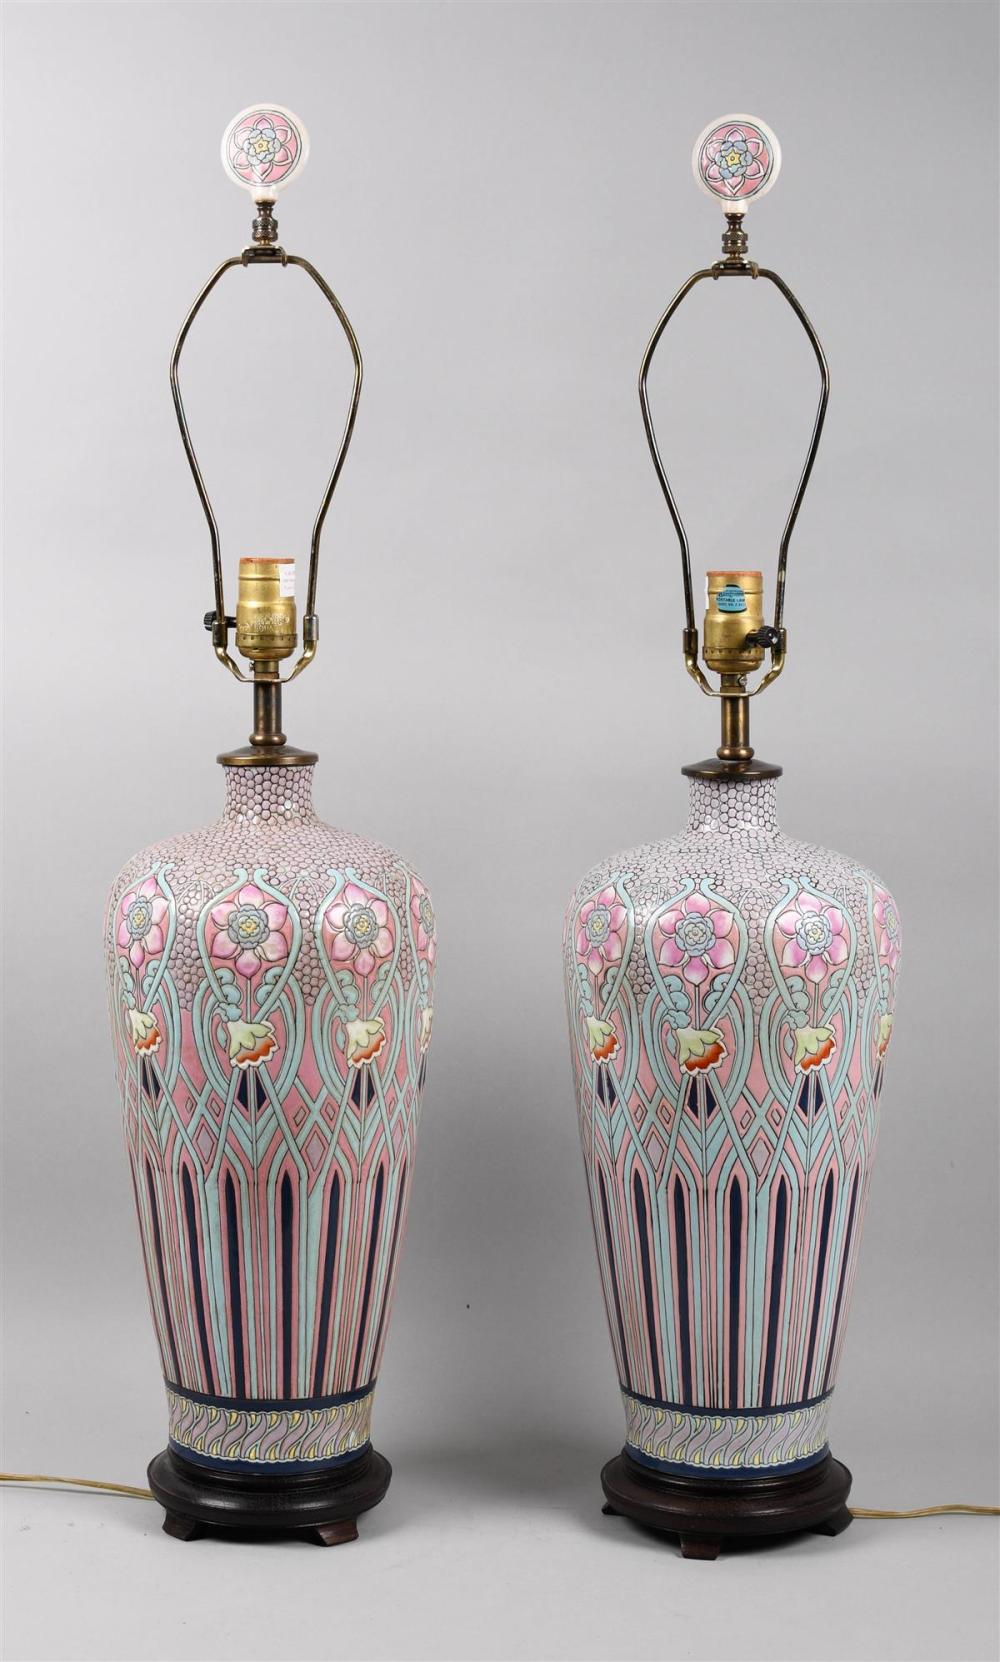 PAIR OF CHINESE ENAMELED ART NOUVEAU